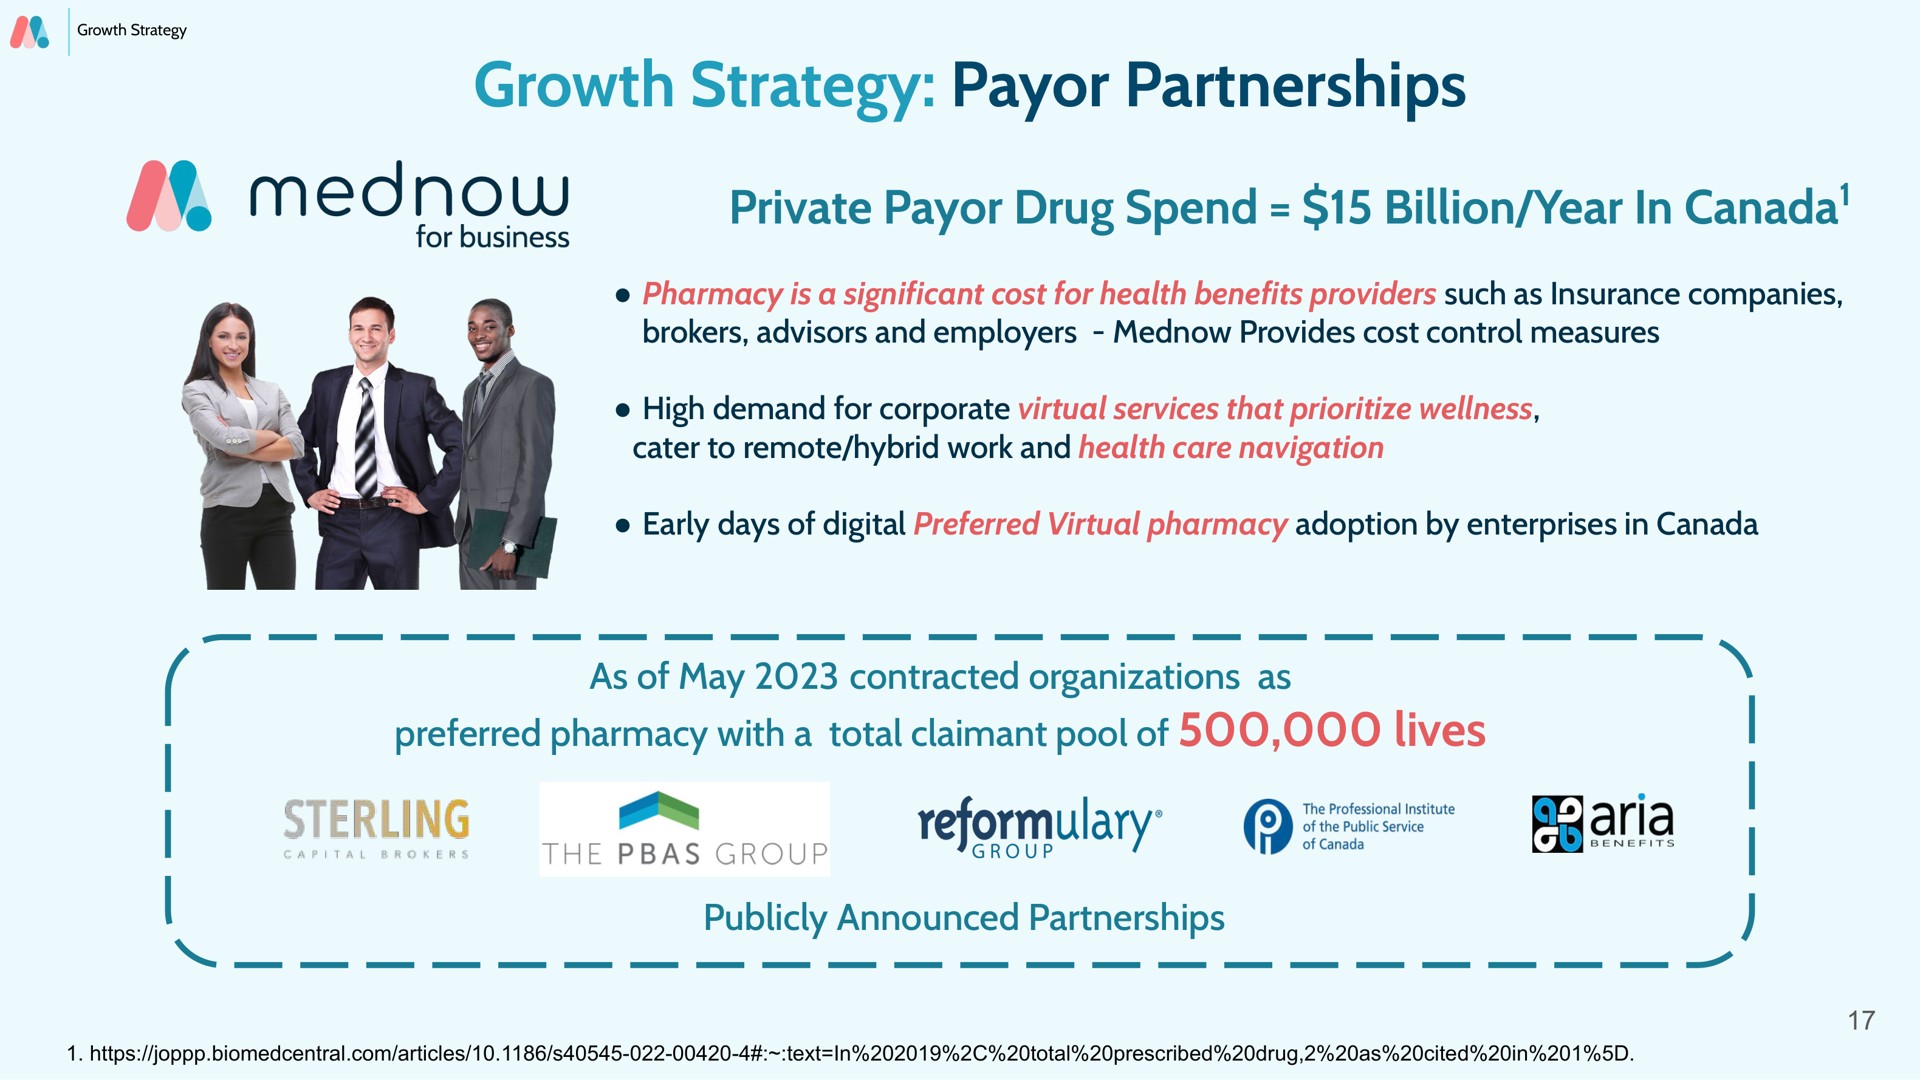 growth strategy payor partnerships private payor drug spend billion year in canada canada preferred pharmacy with a total claimant pool of lives | Mednow